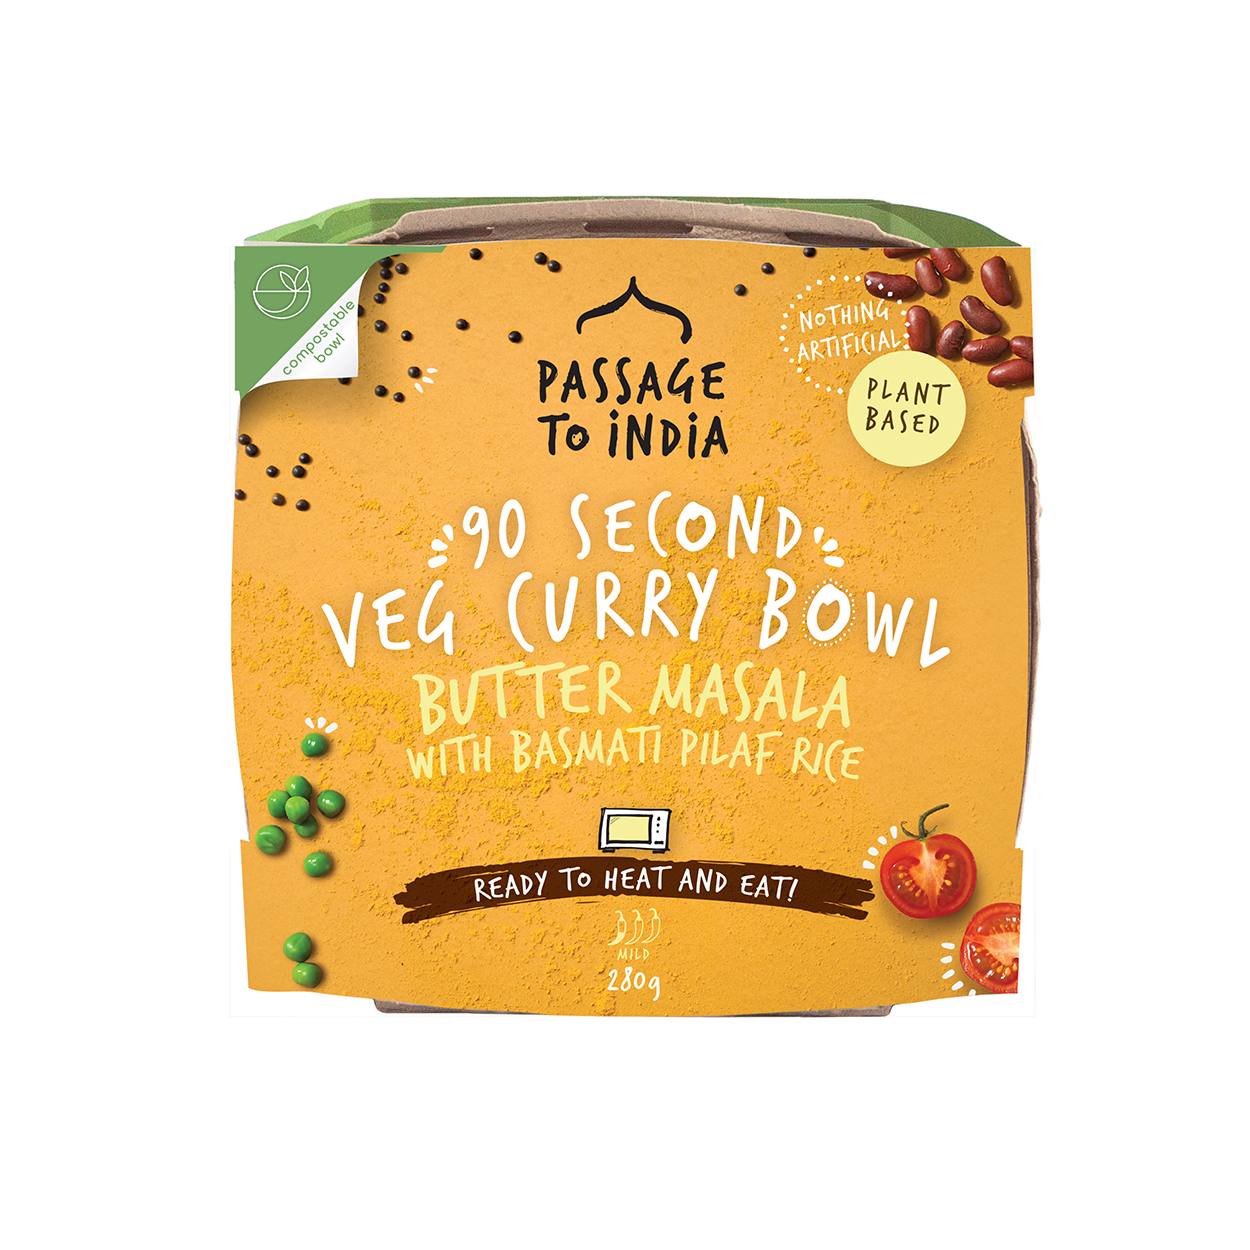 90-Second Veg Curry Bowl in butter masala flavour